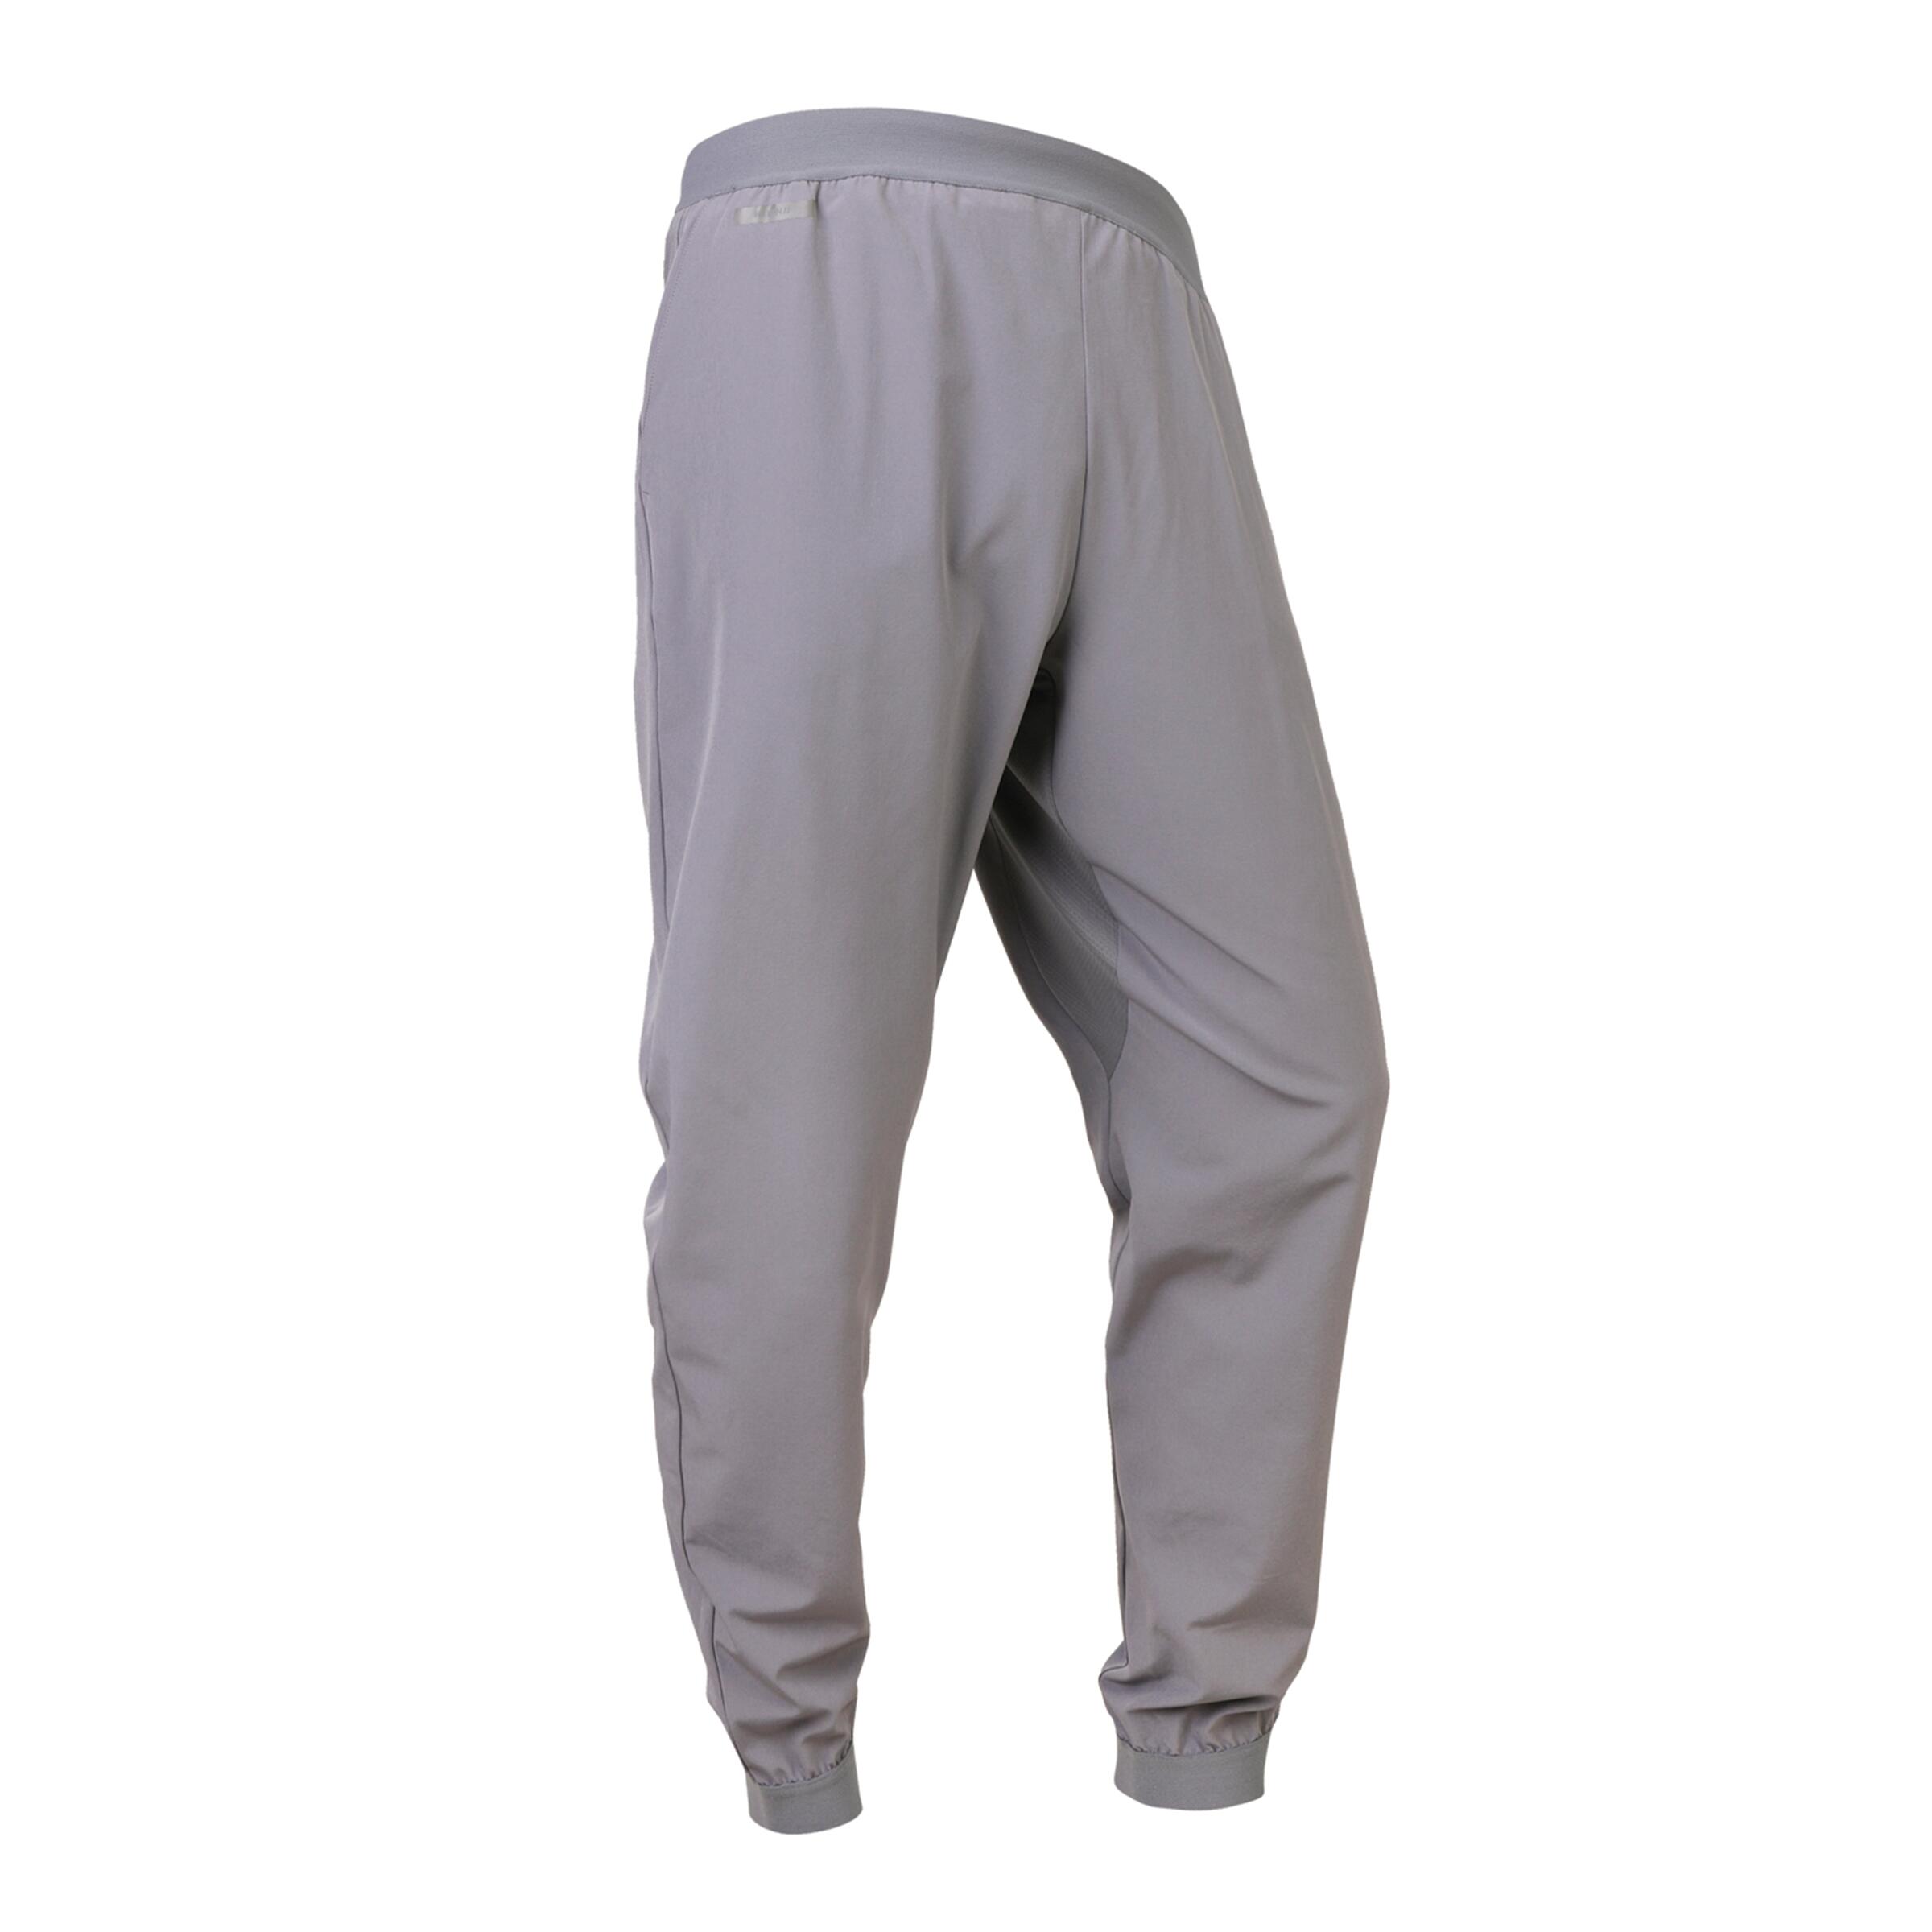 FLX by Decathlon Solid Men Grey Track Pants  Buy FLX by Decathlon Solid Men  Grey Track Pants Online at Best Prices in India  Flipkartcom